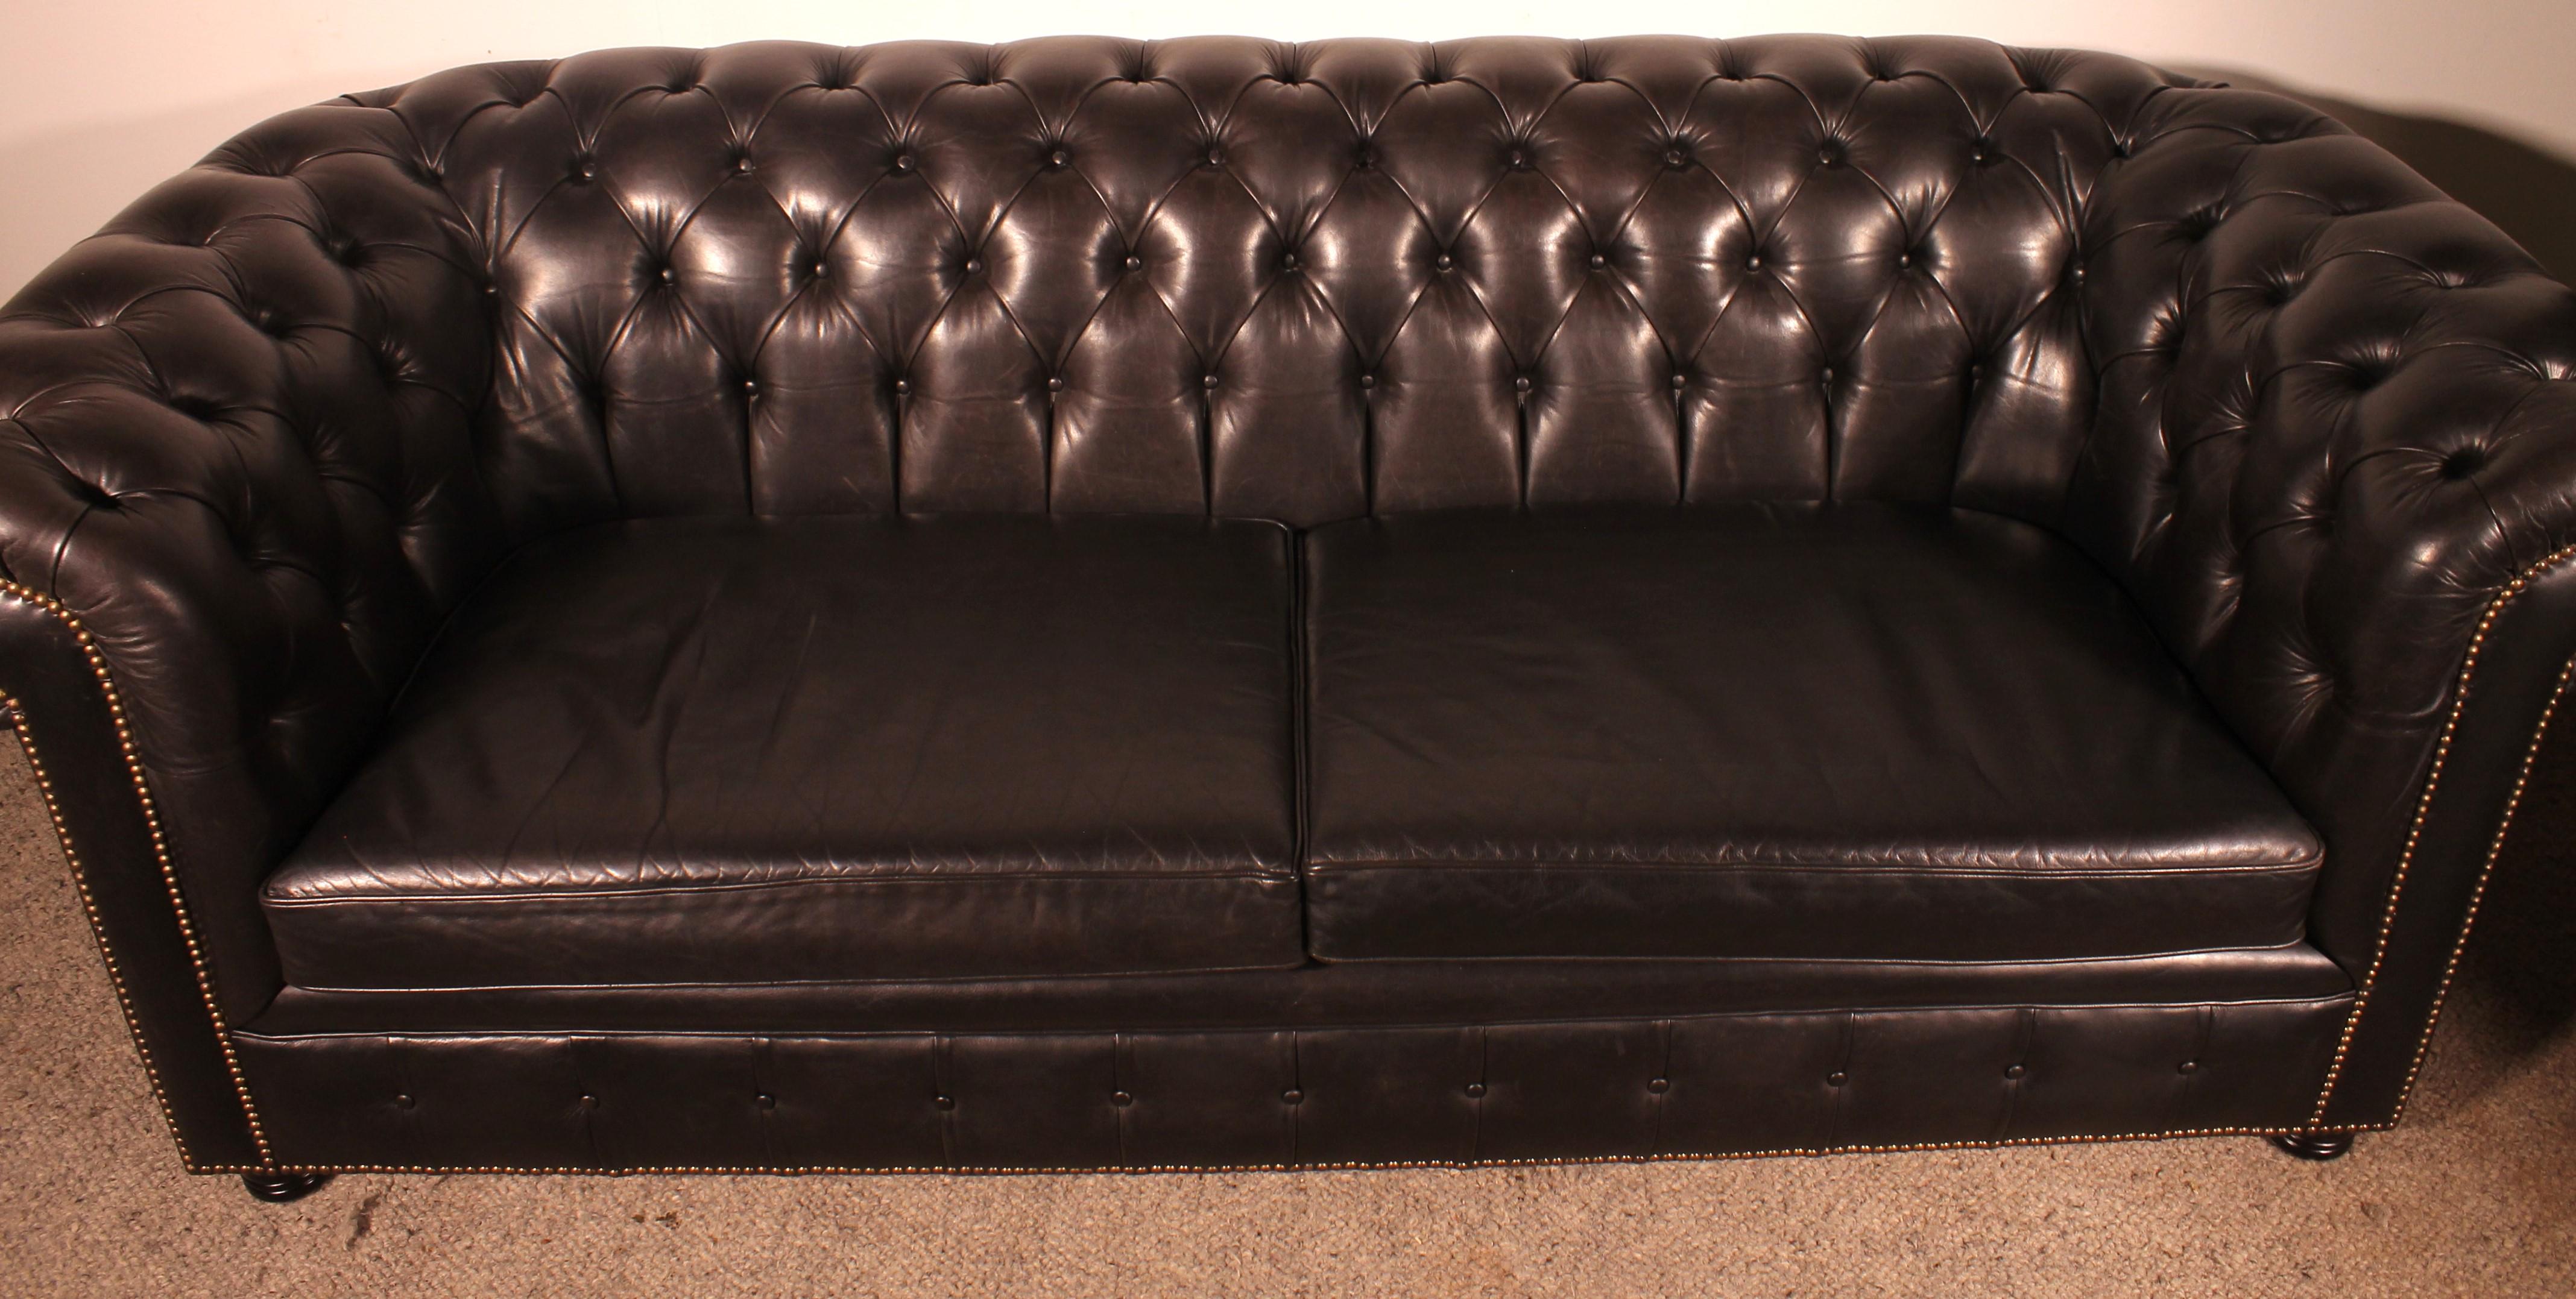 Black Leather Chesterfield Sofa In Good Condition For Sale In Brussels, Brussels